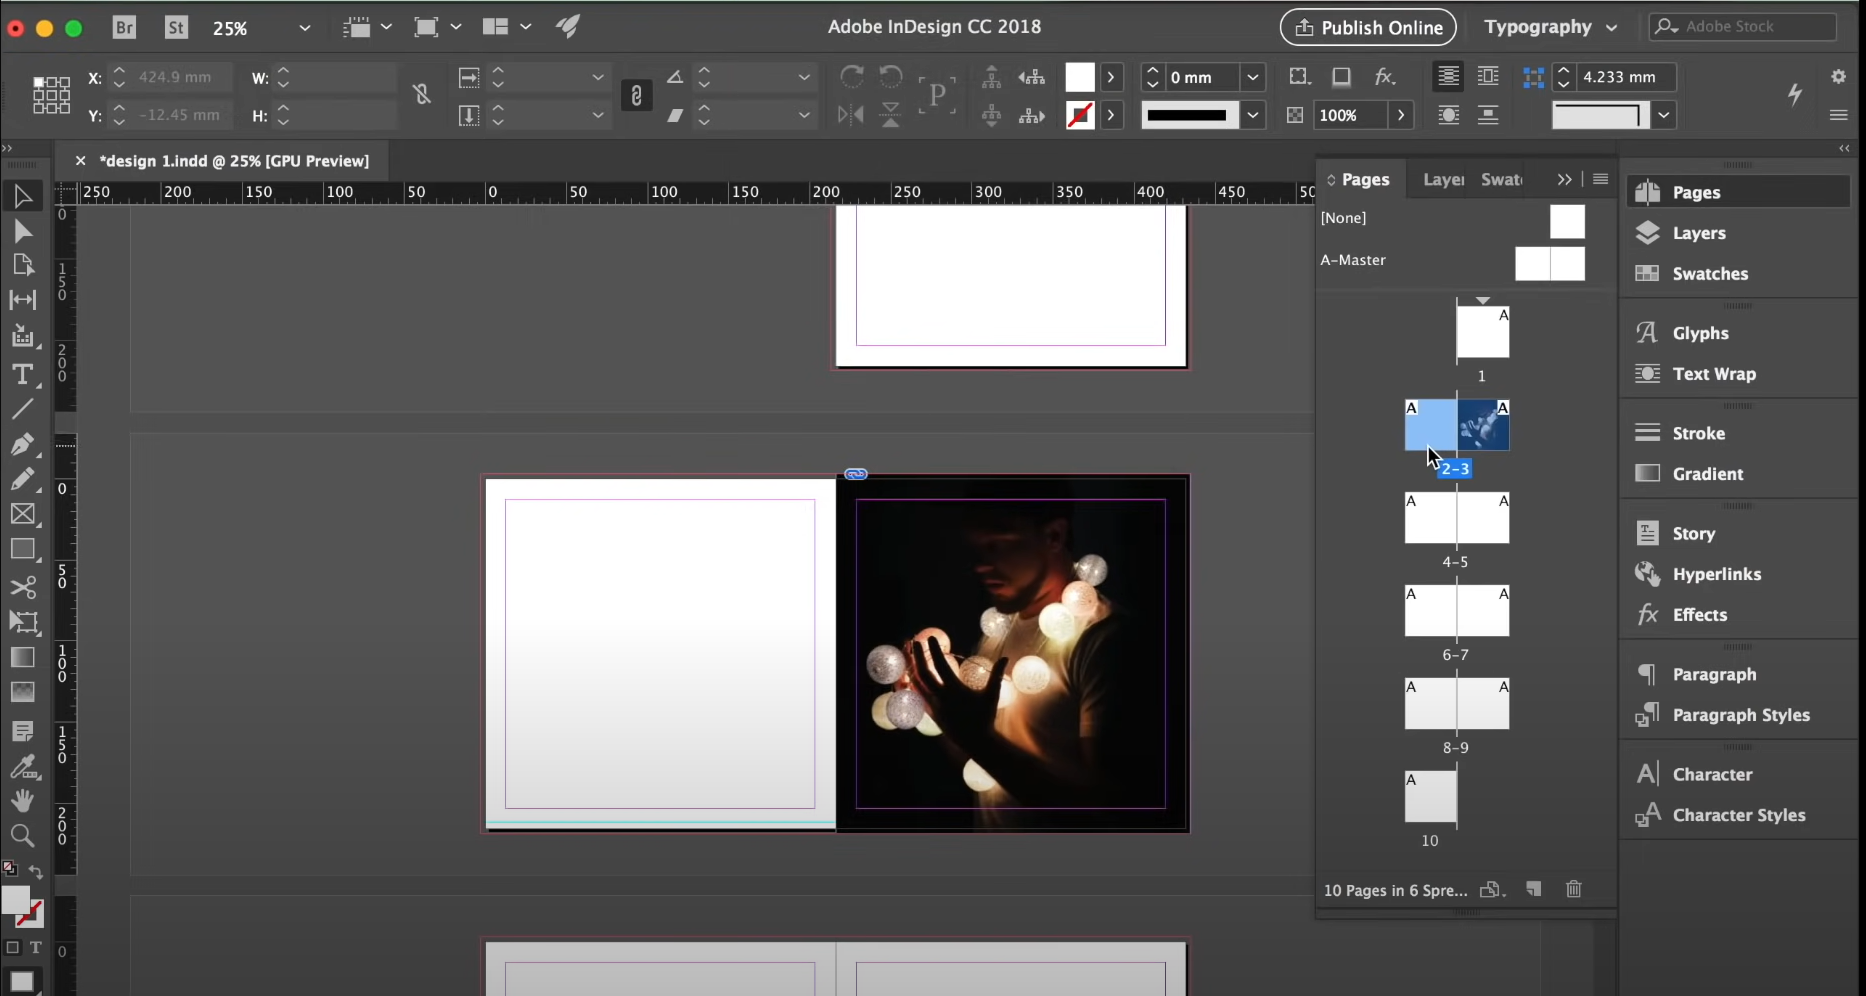 Adobe InDesign pages
